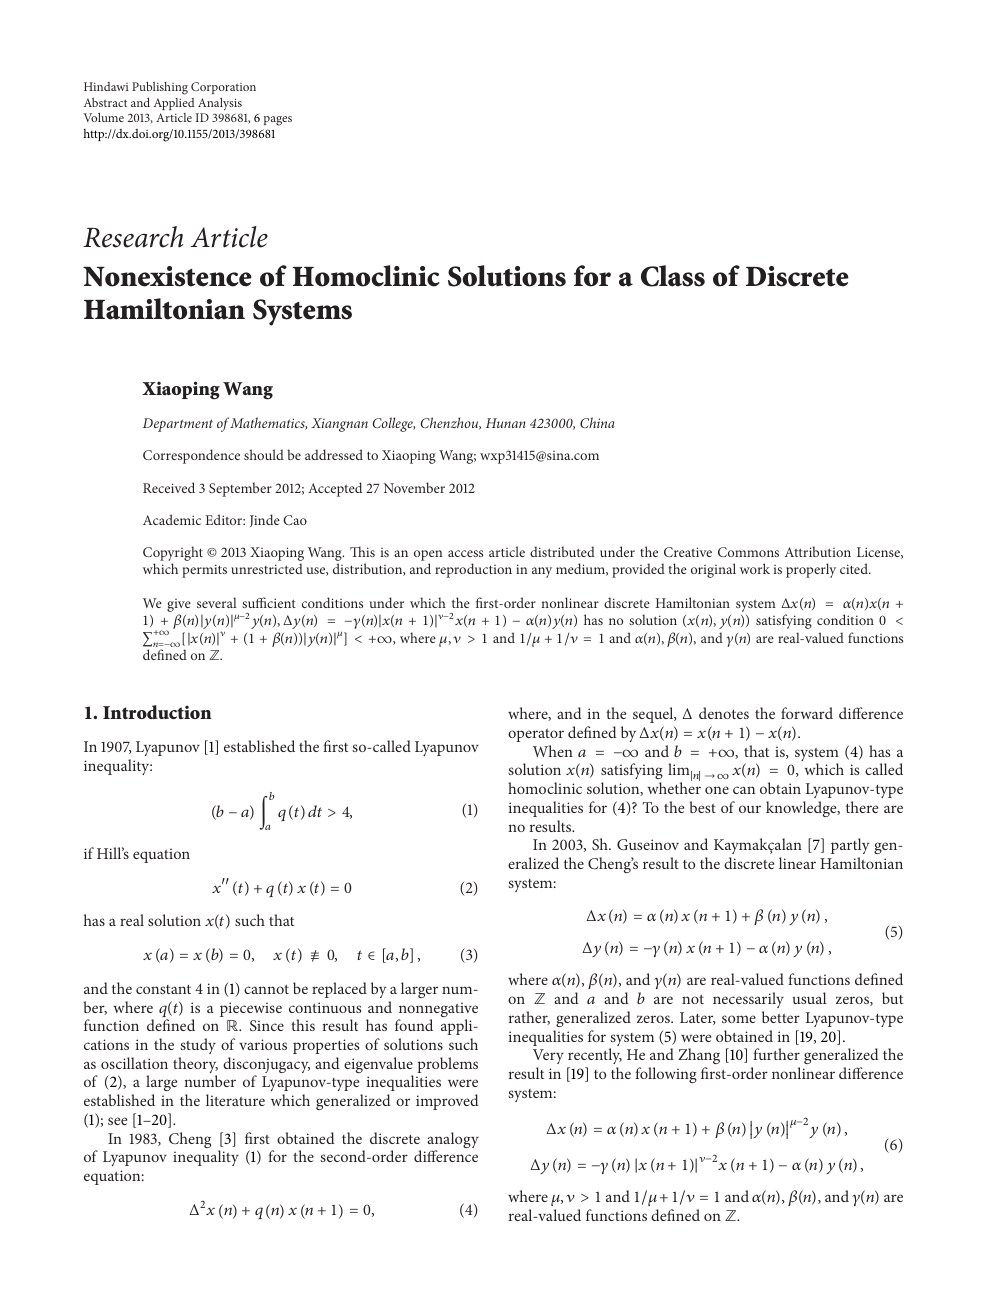 Nonexistence Of Homoclinic Solutions For A Class Of Discrete Hamiltonian Systems Topic Of Research Paper In Mathematics Download Scholarly Article Pdf And Read For Free On Cyberleninka Open Science Hub